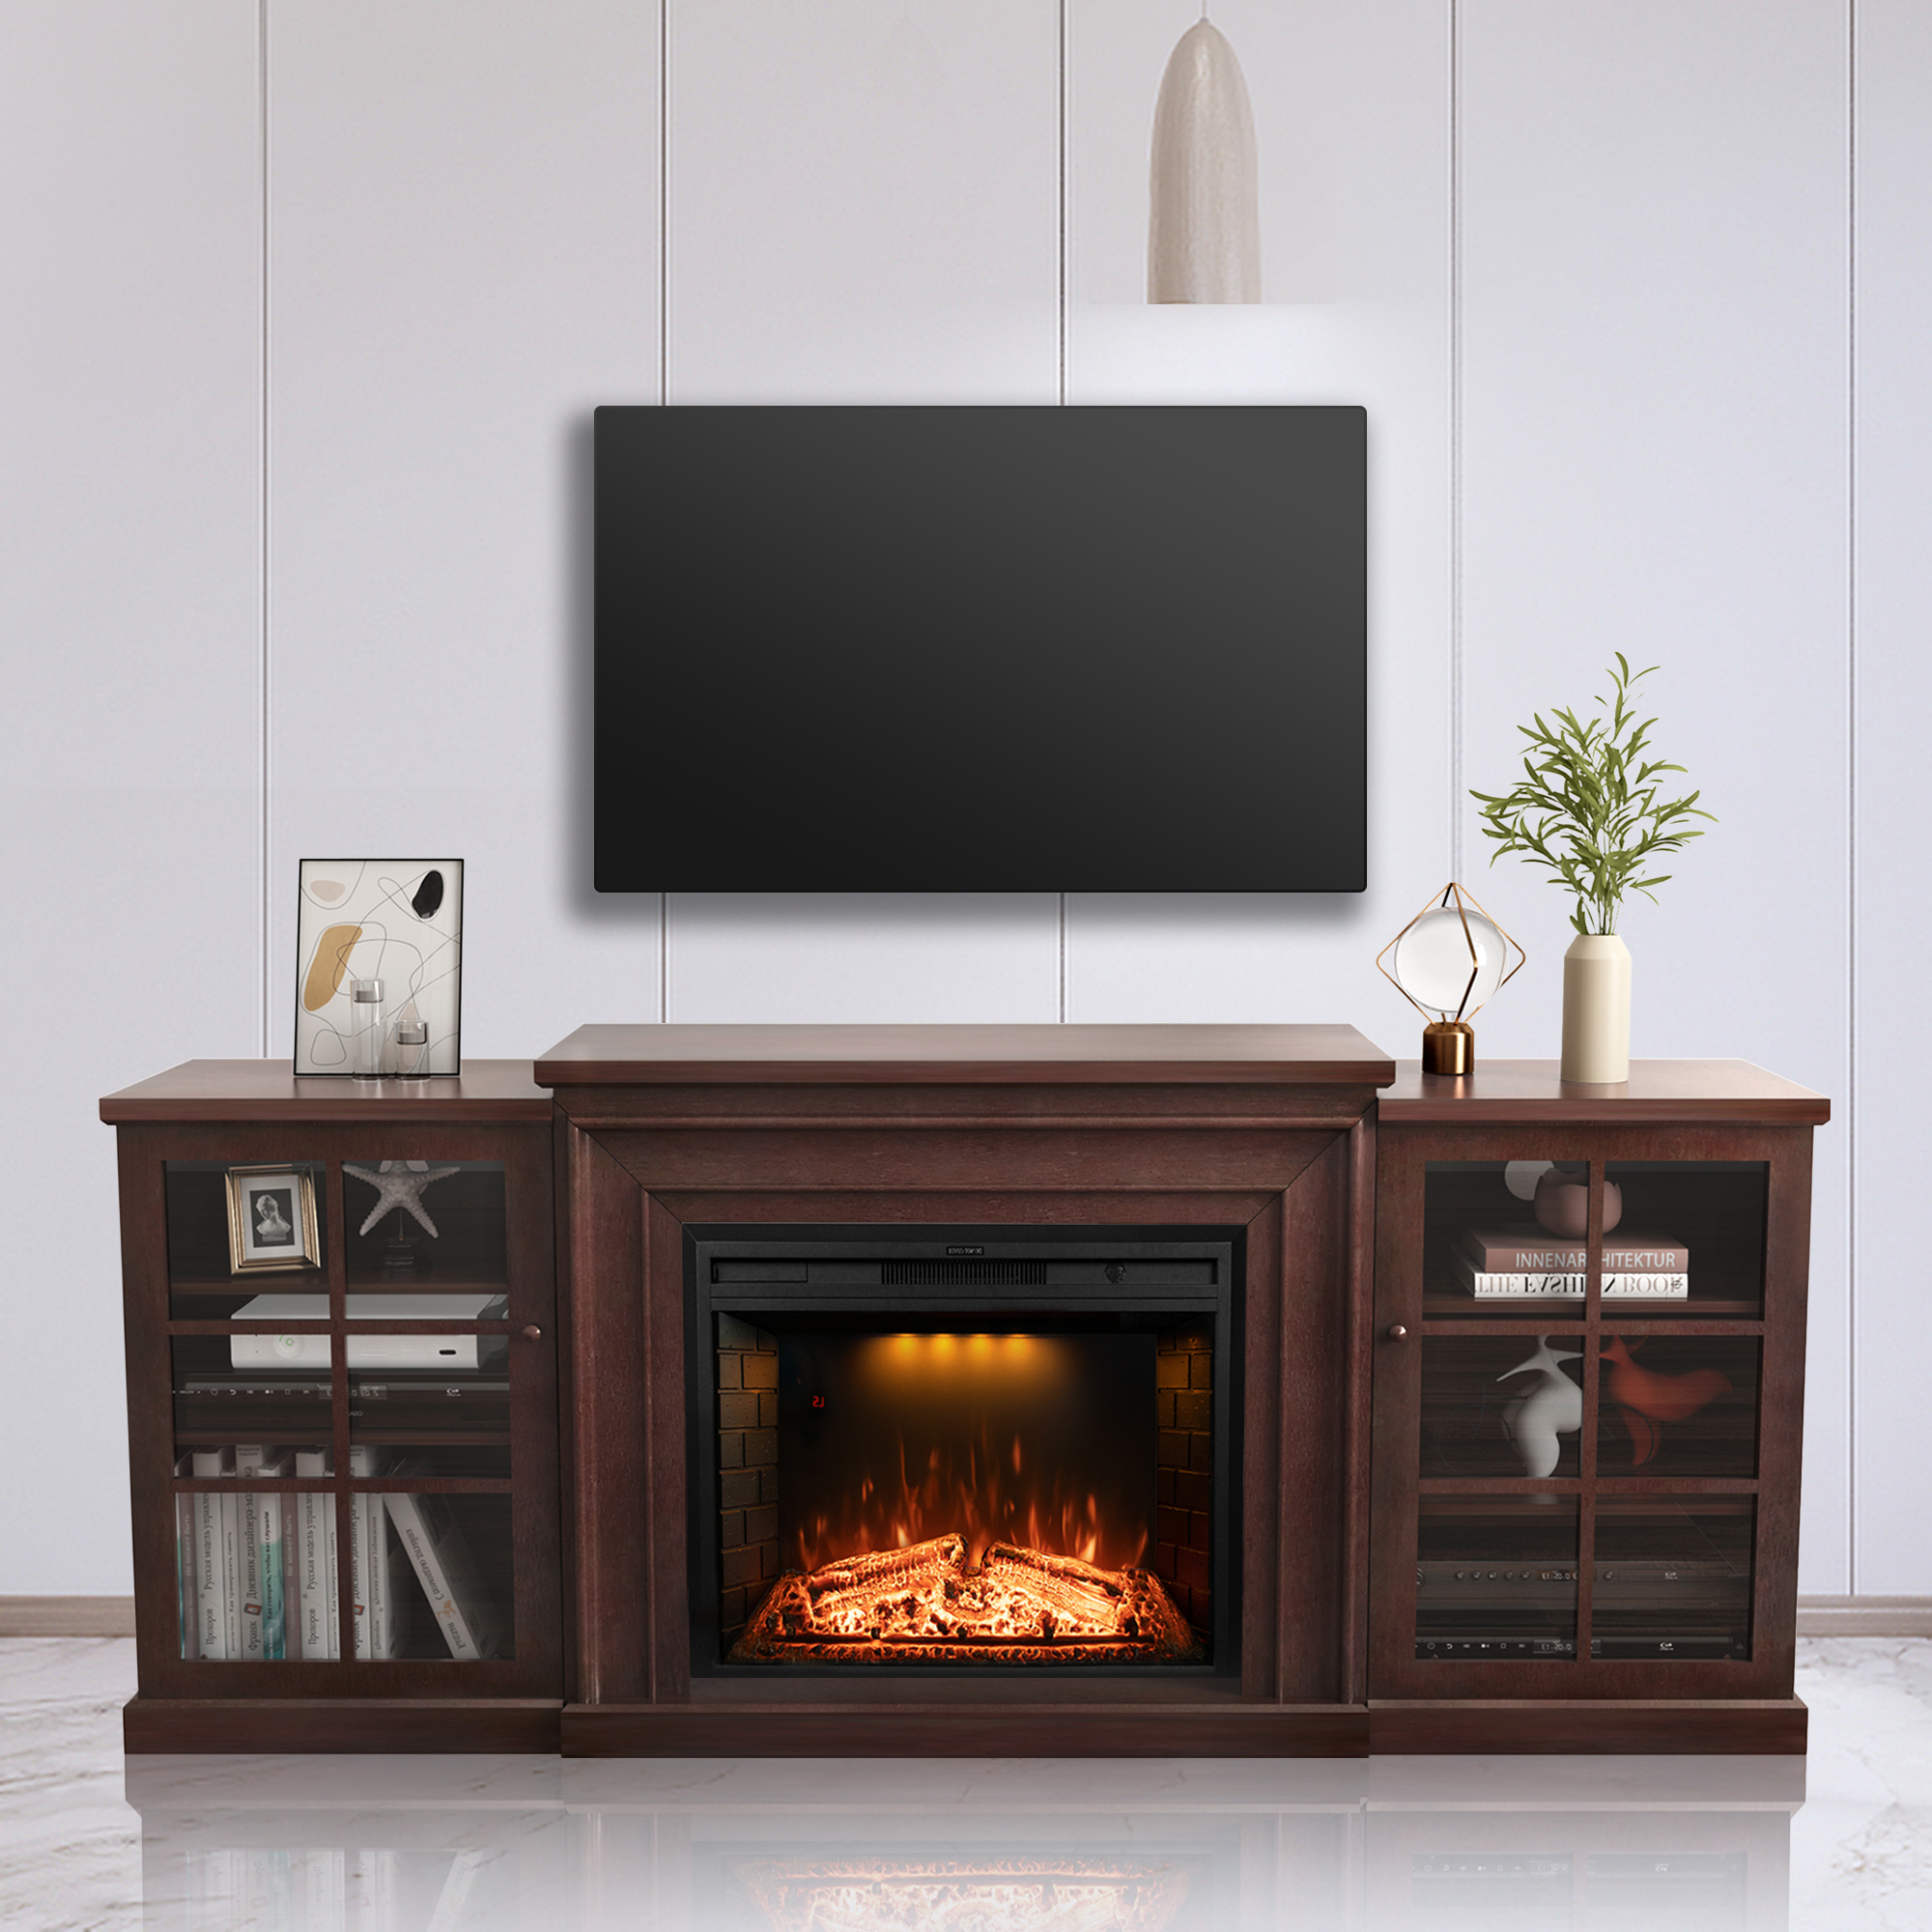  TV Stand for TVs Up To 82" with Electric Fireplace,Entertainment Center with Glass Door Console Cabinets, with Adjustable Shelf & Remote Control, Dark Walnut